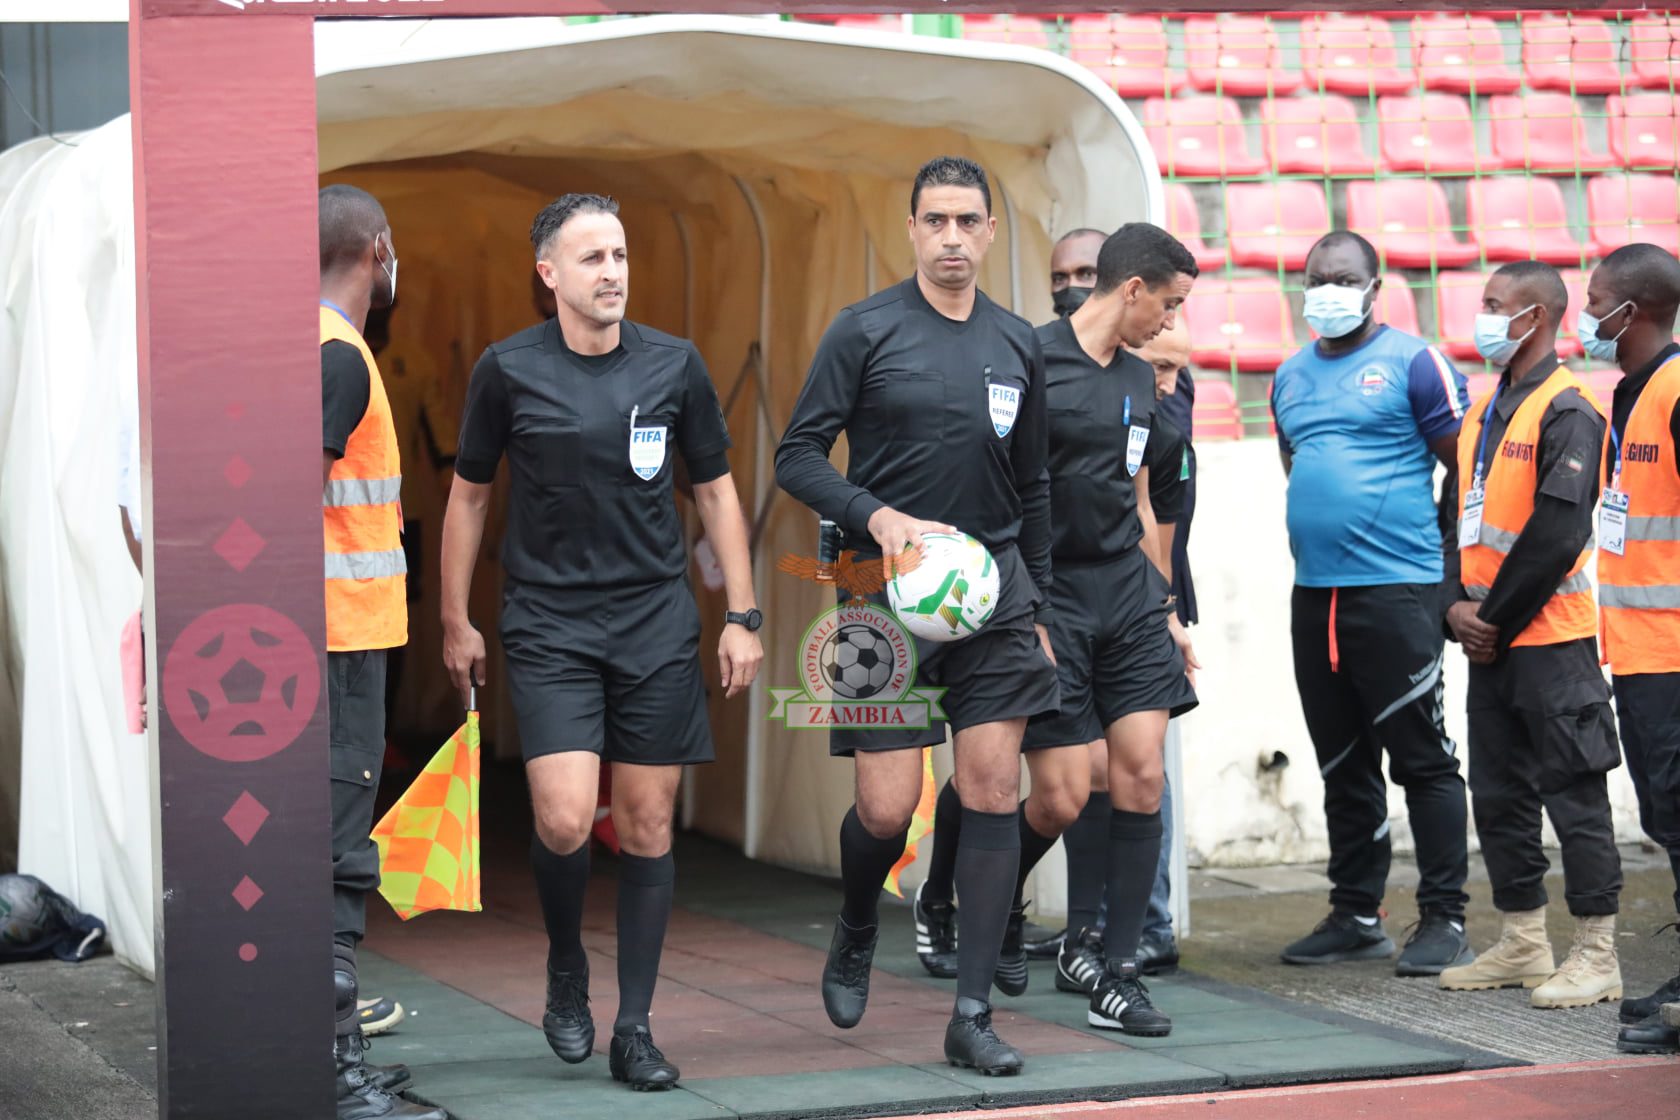 The Football Association of Zambia FAZ Petitions FIFA Over Moroccan Referee